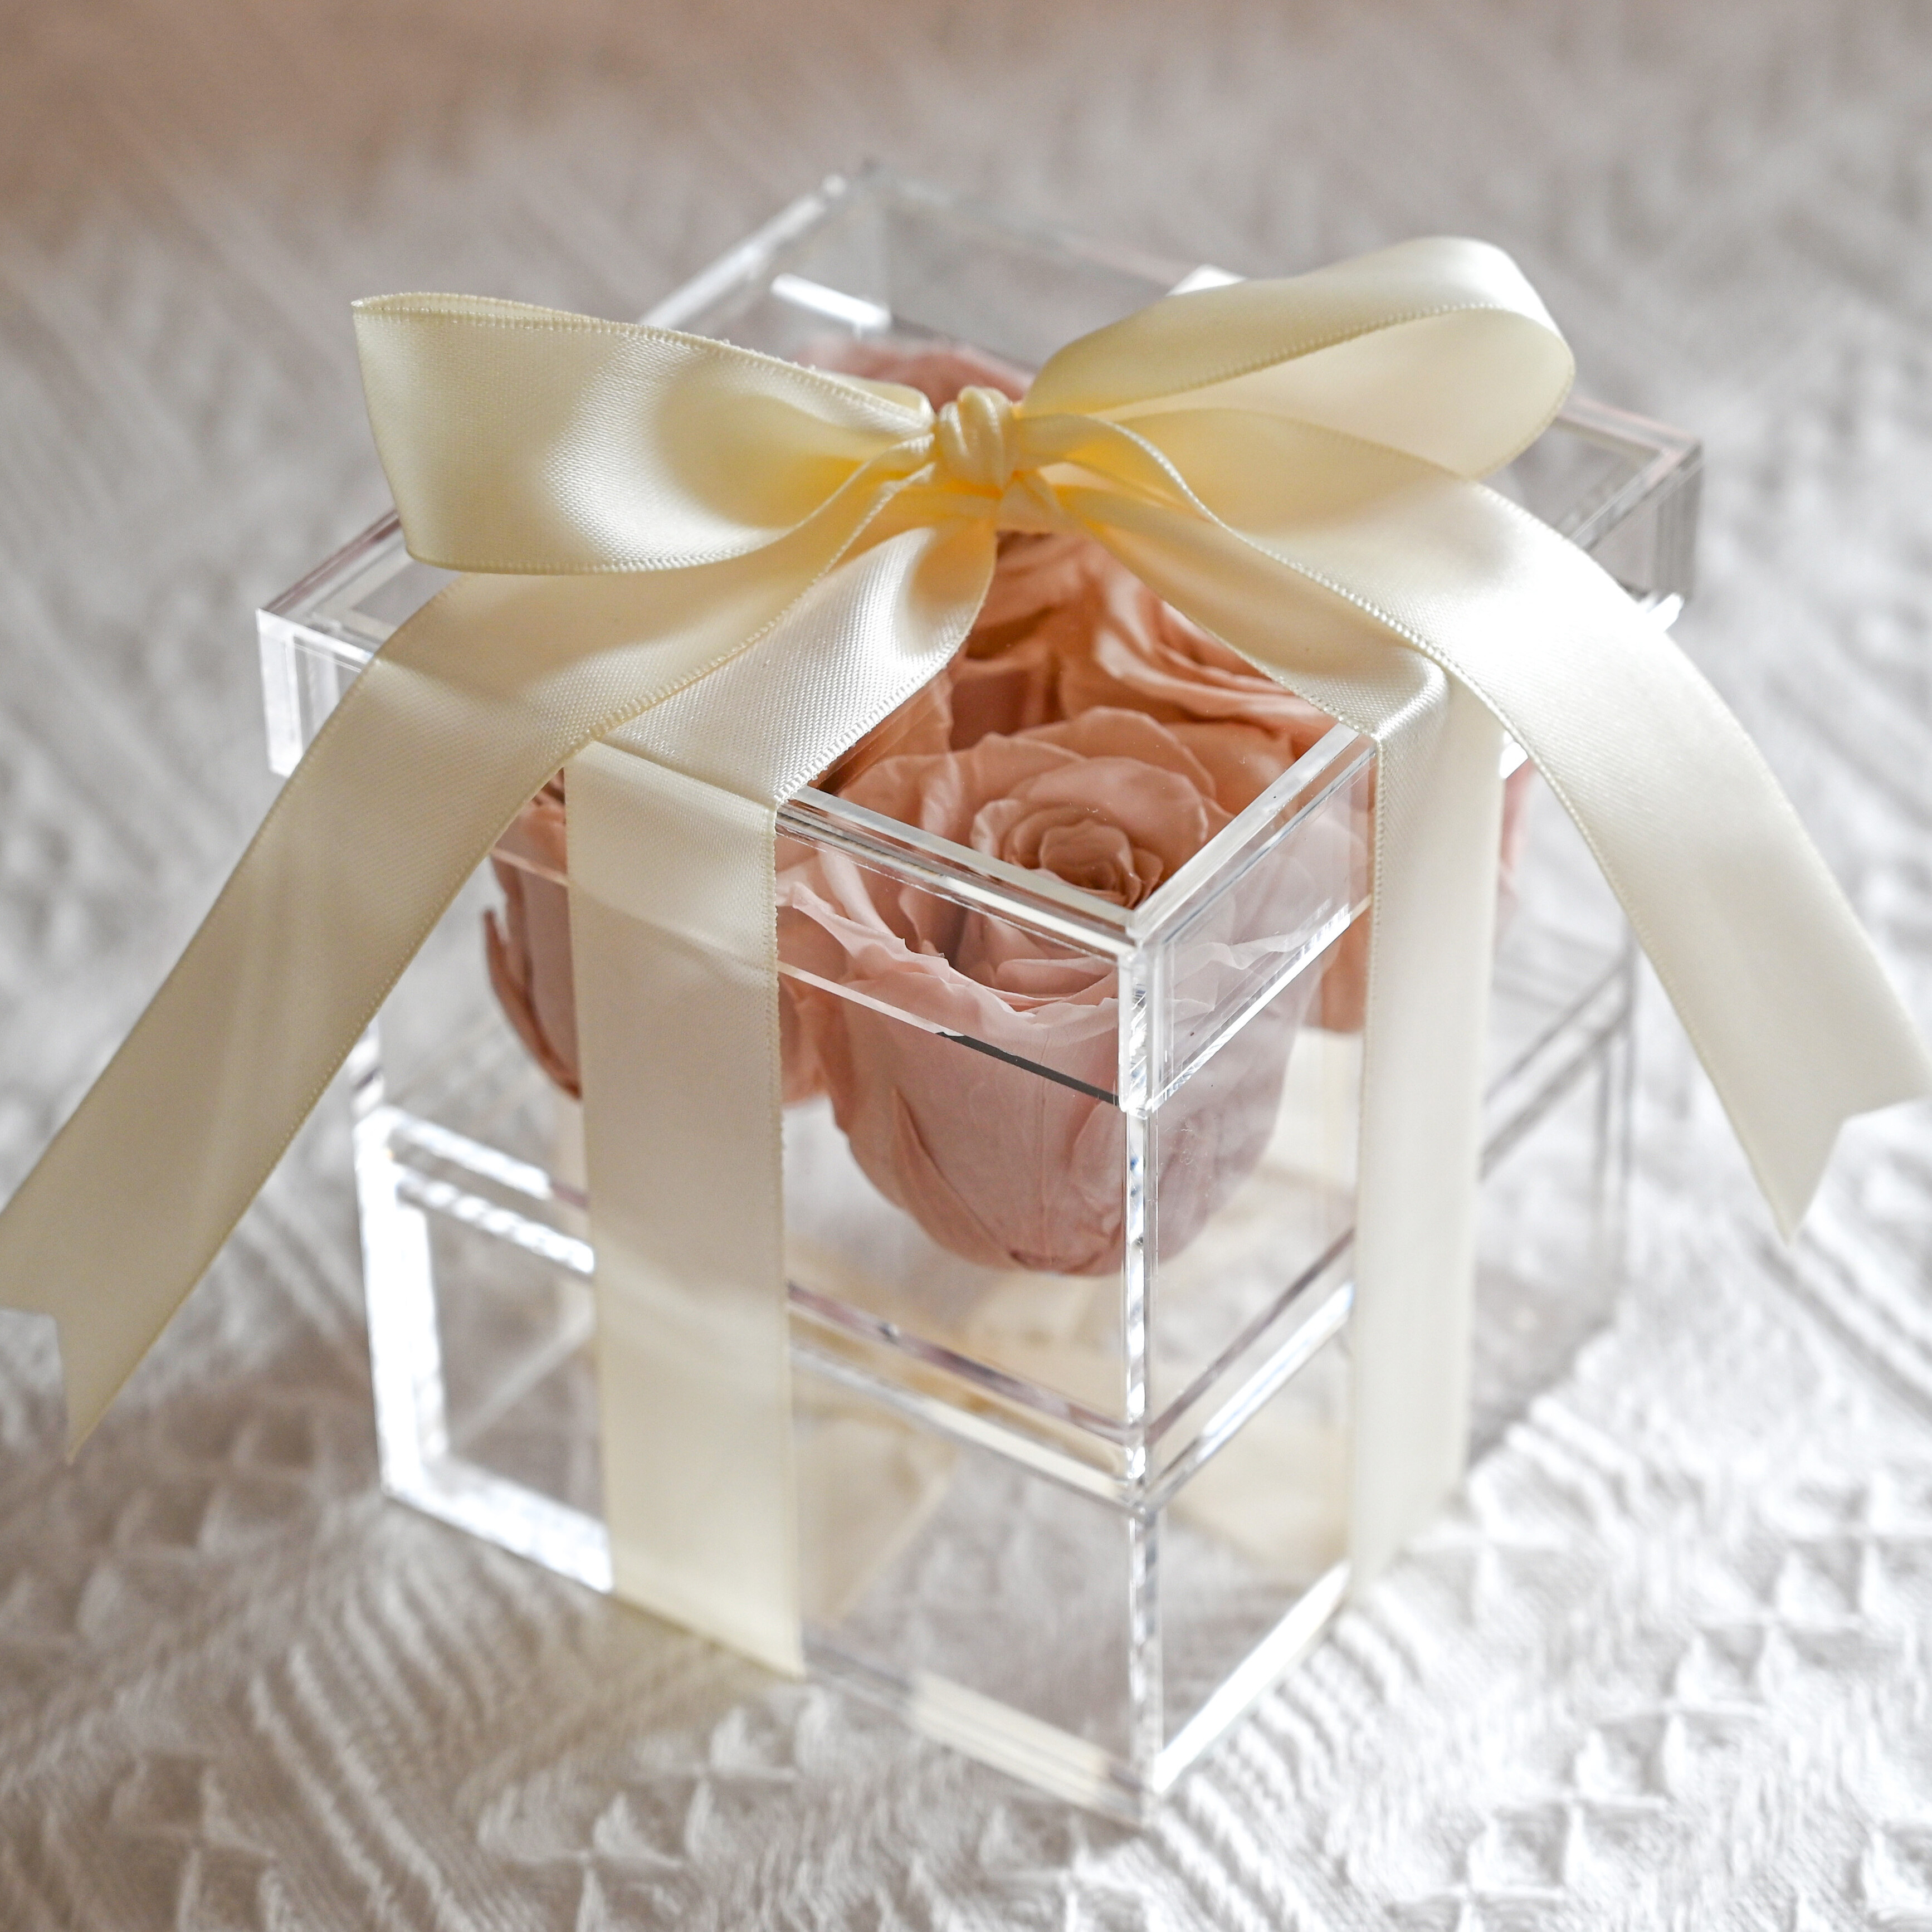 Acrylic Favor Boxes Gifts, Clear Acrylic Party Favor Box